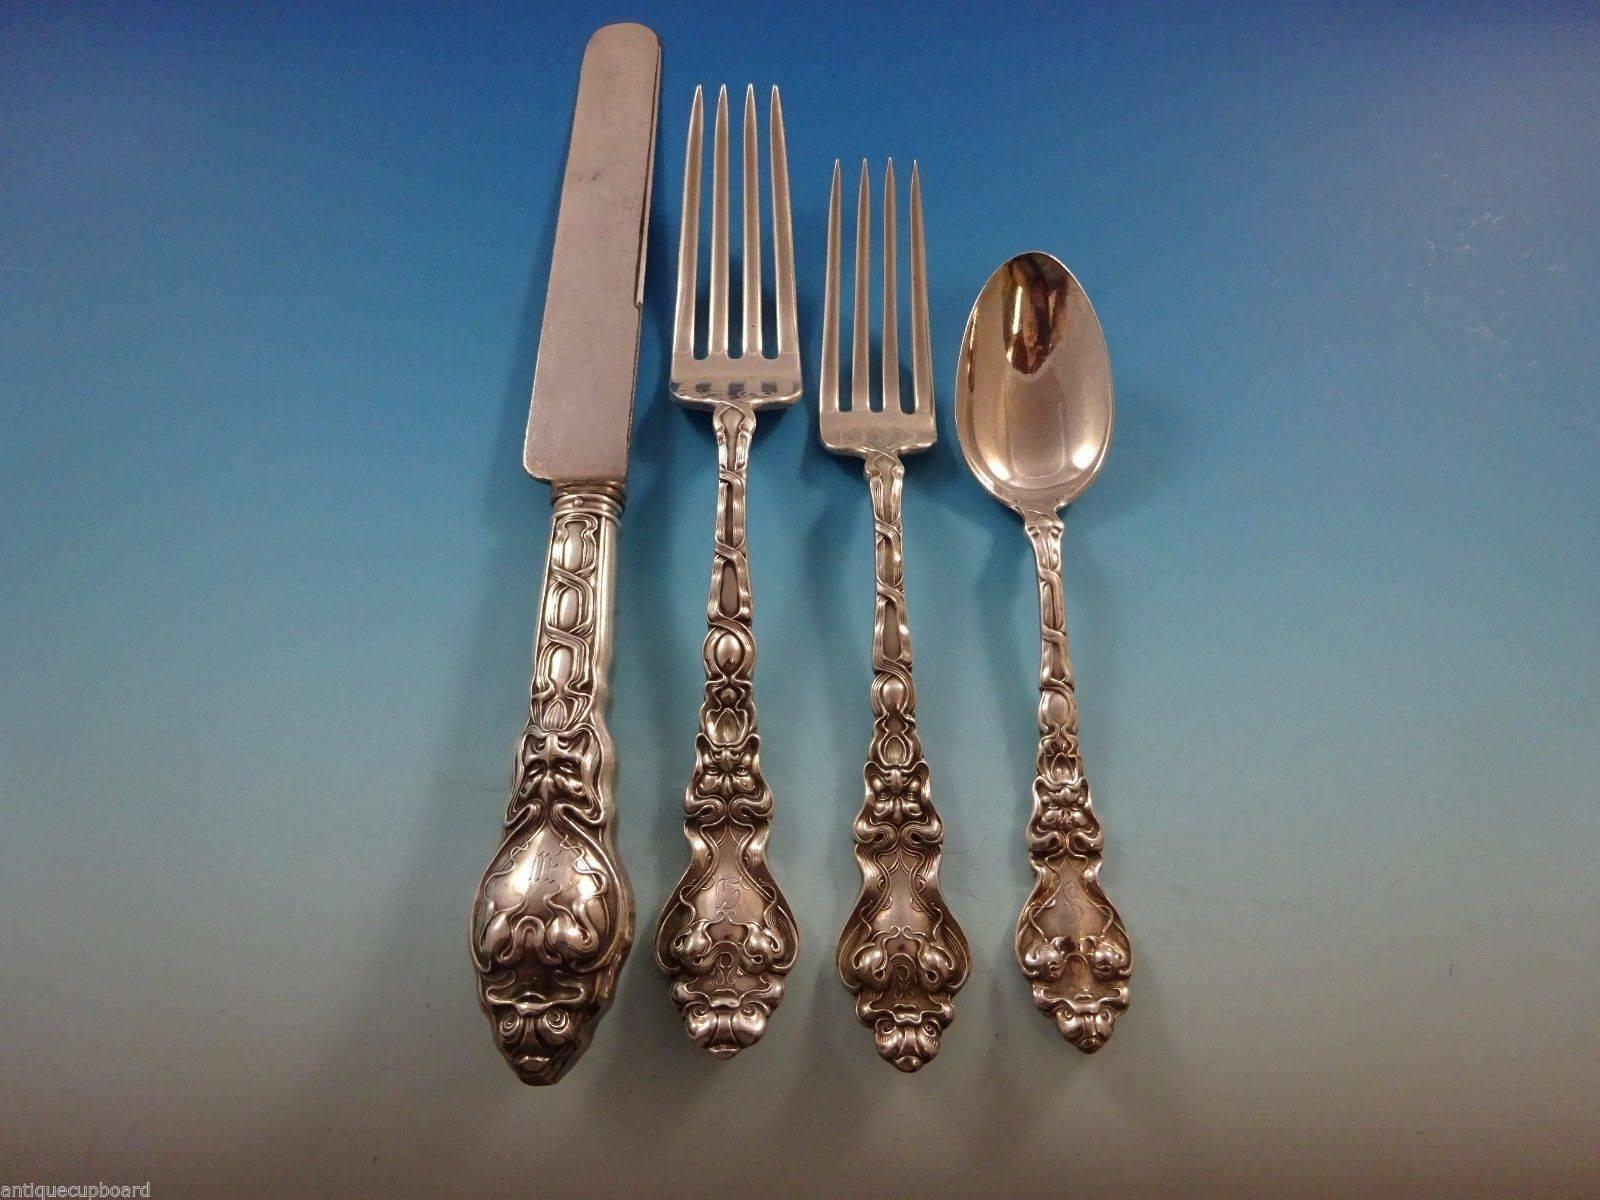 Exceptional Figural Art Nouveau Douvaine by Unger sterling silver flatware dinner size set of 57 pieces. This pattern features a stylized dolphin and the face of the North Wind. This set includes:

Eight dinner knives, 9 1/2